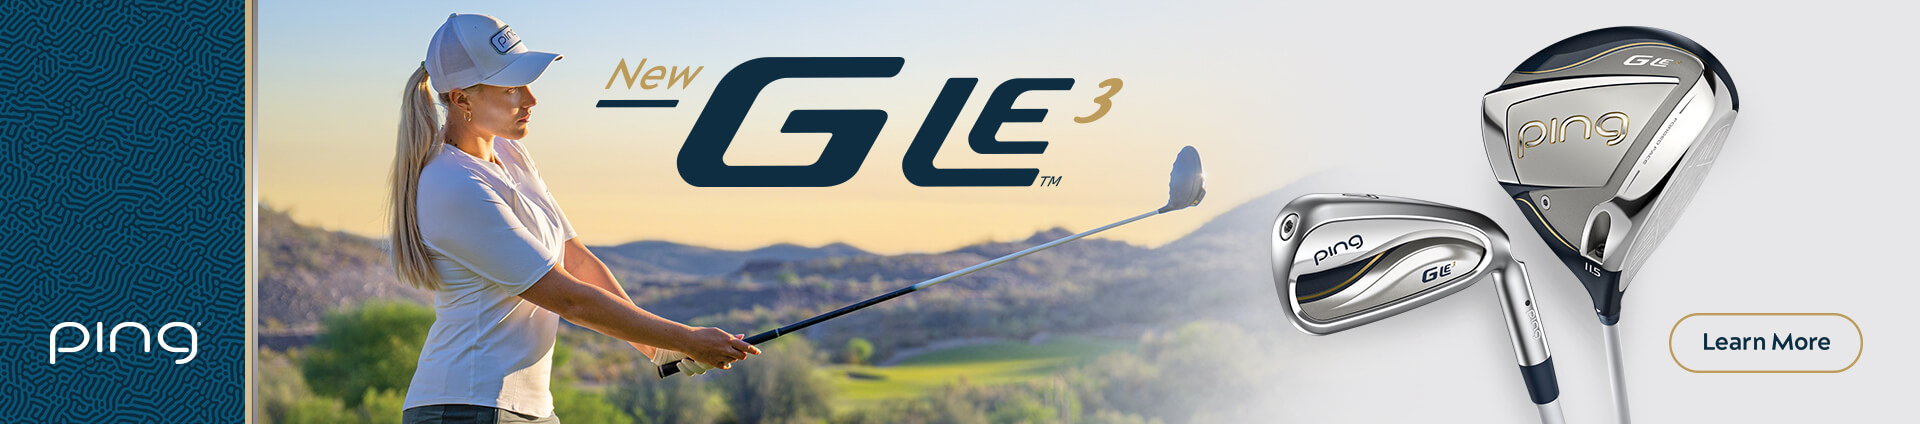 Ping G Le3 Banner